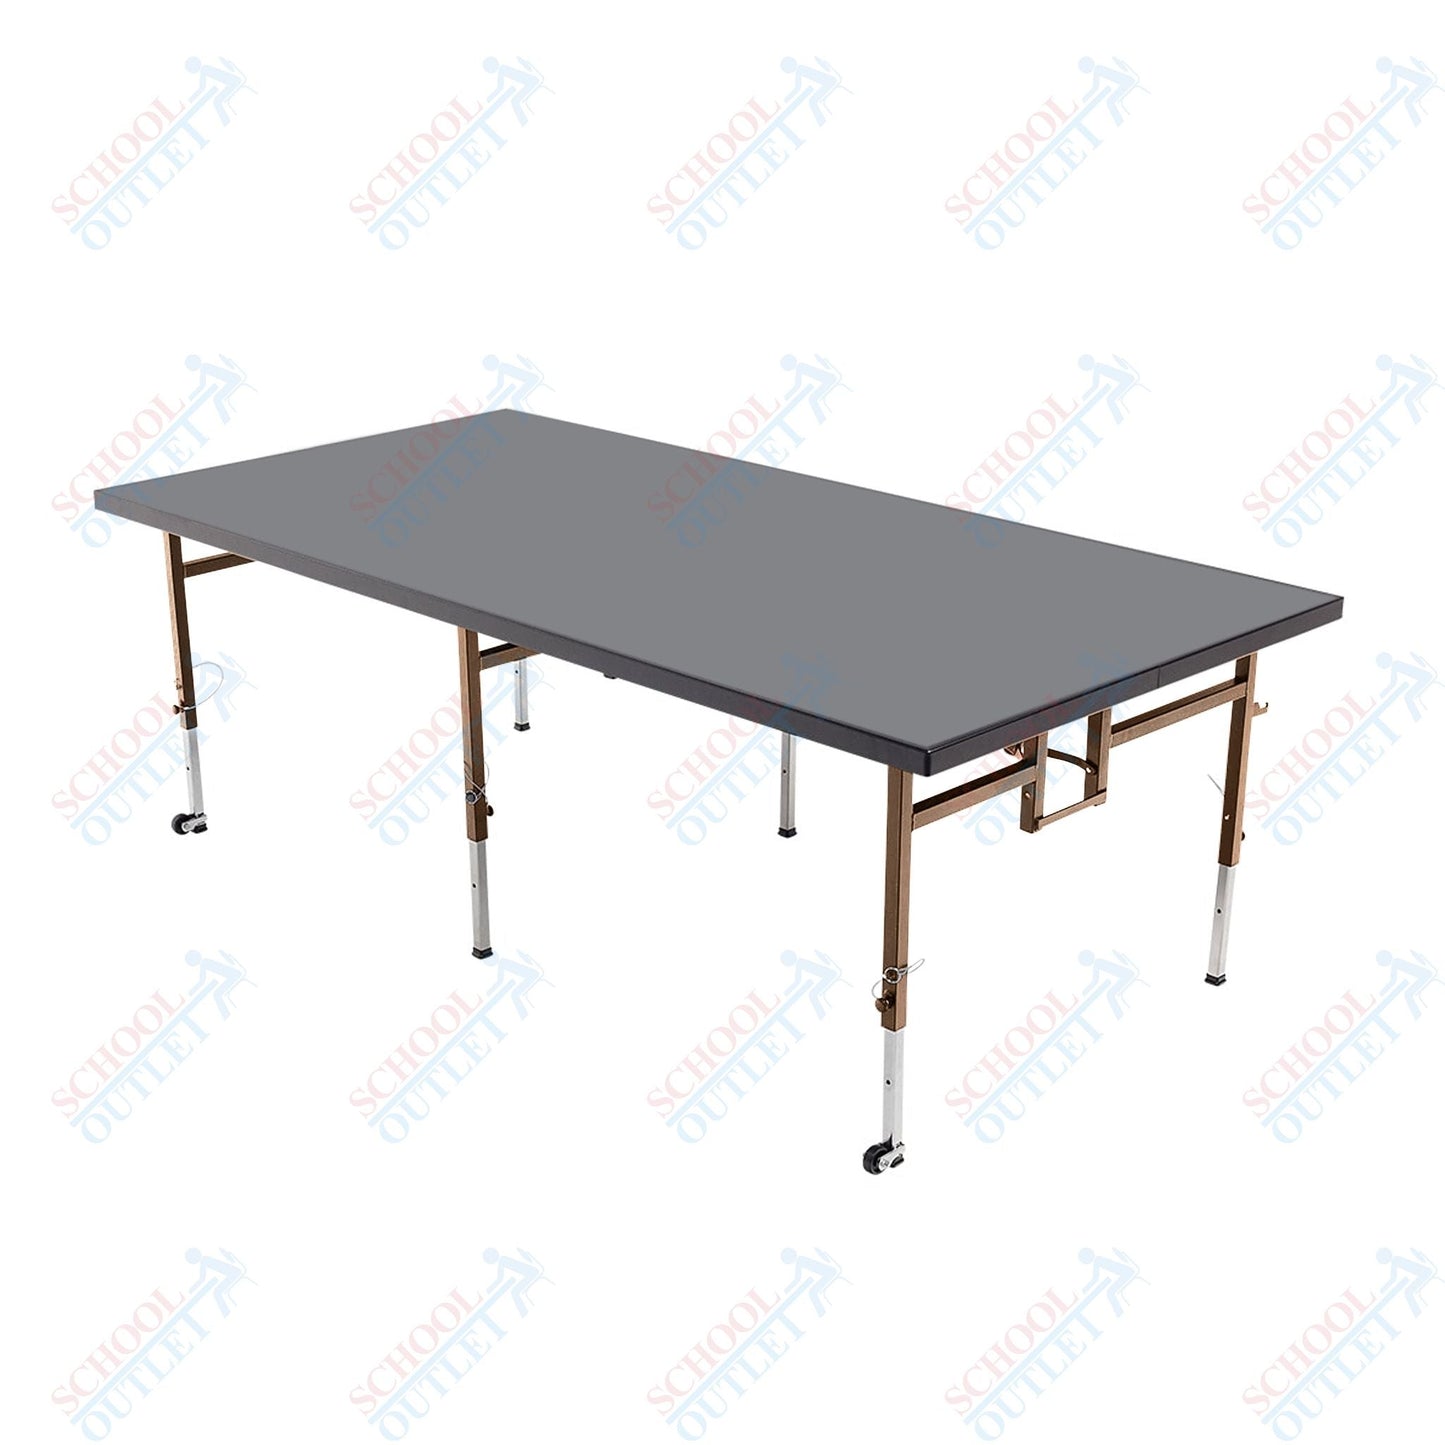 AmTab Adjustable Height Stage - Polypropylene Top - 36"W x 72"L x Adjustable 16" to 24"H (AmTab AMT-STA3616P) - SchoolOutlet